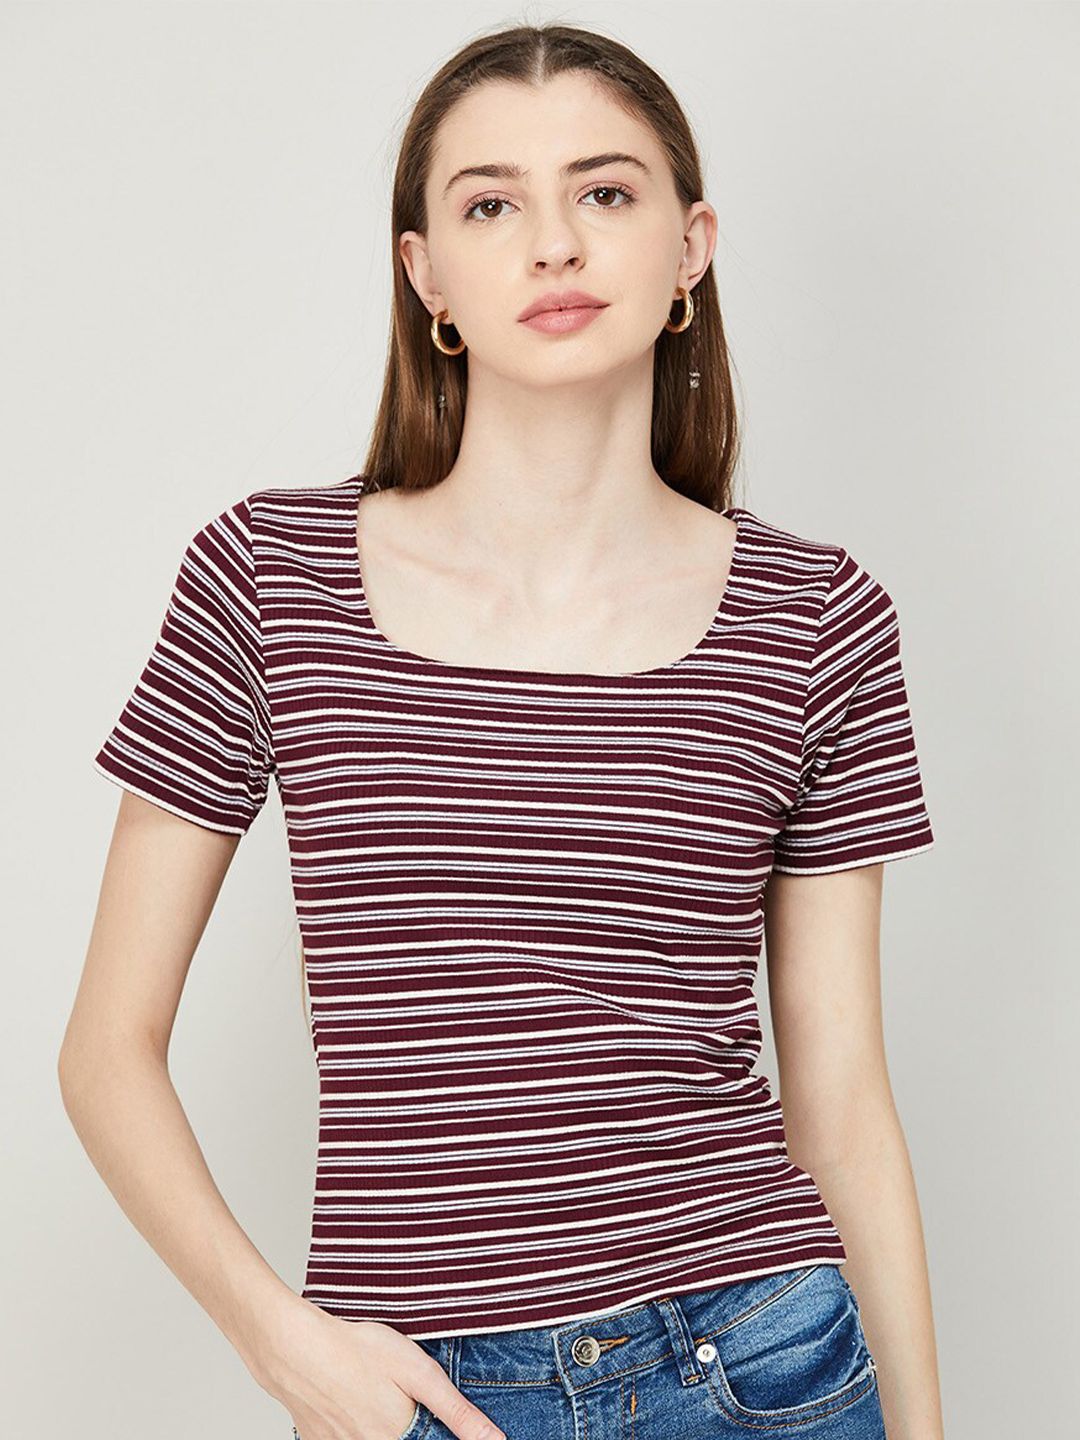 Ginger by Lifestyle Women Striped Top Price in India